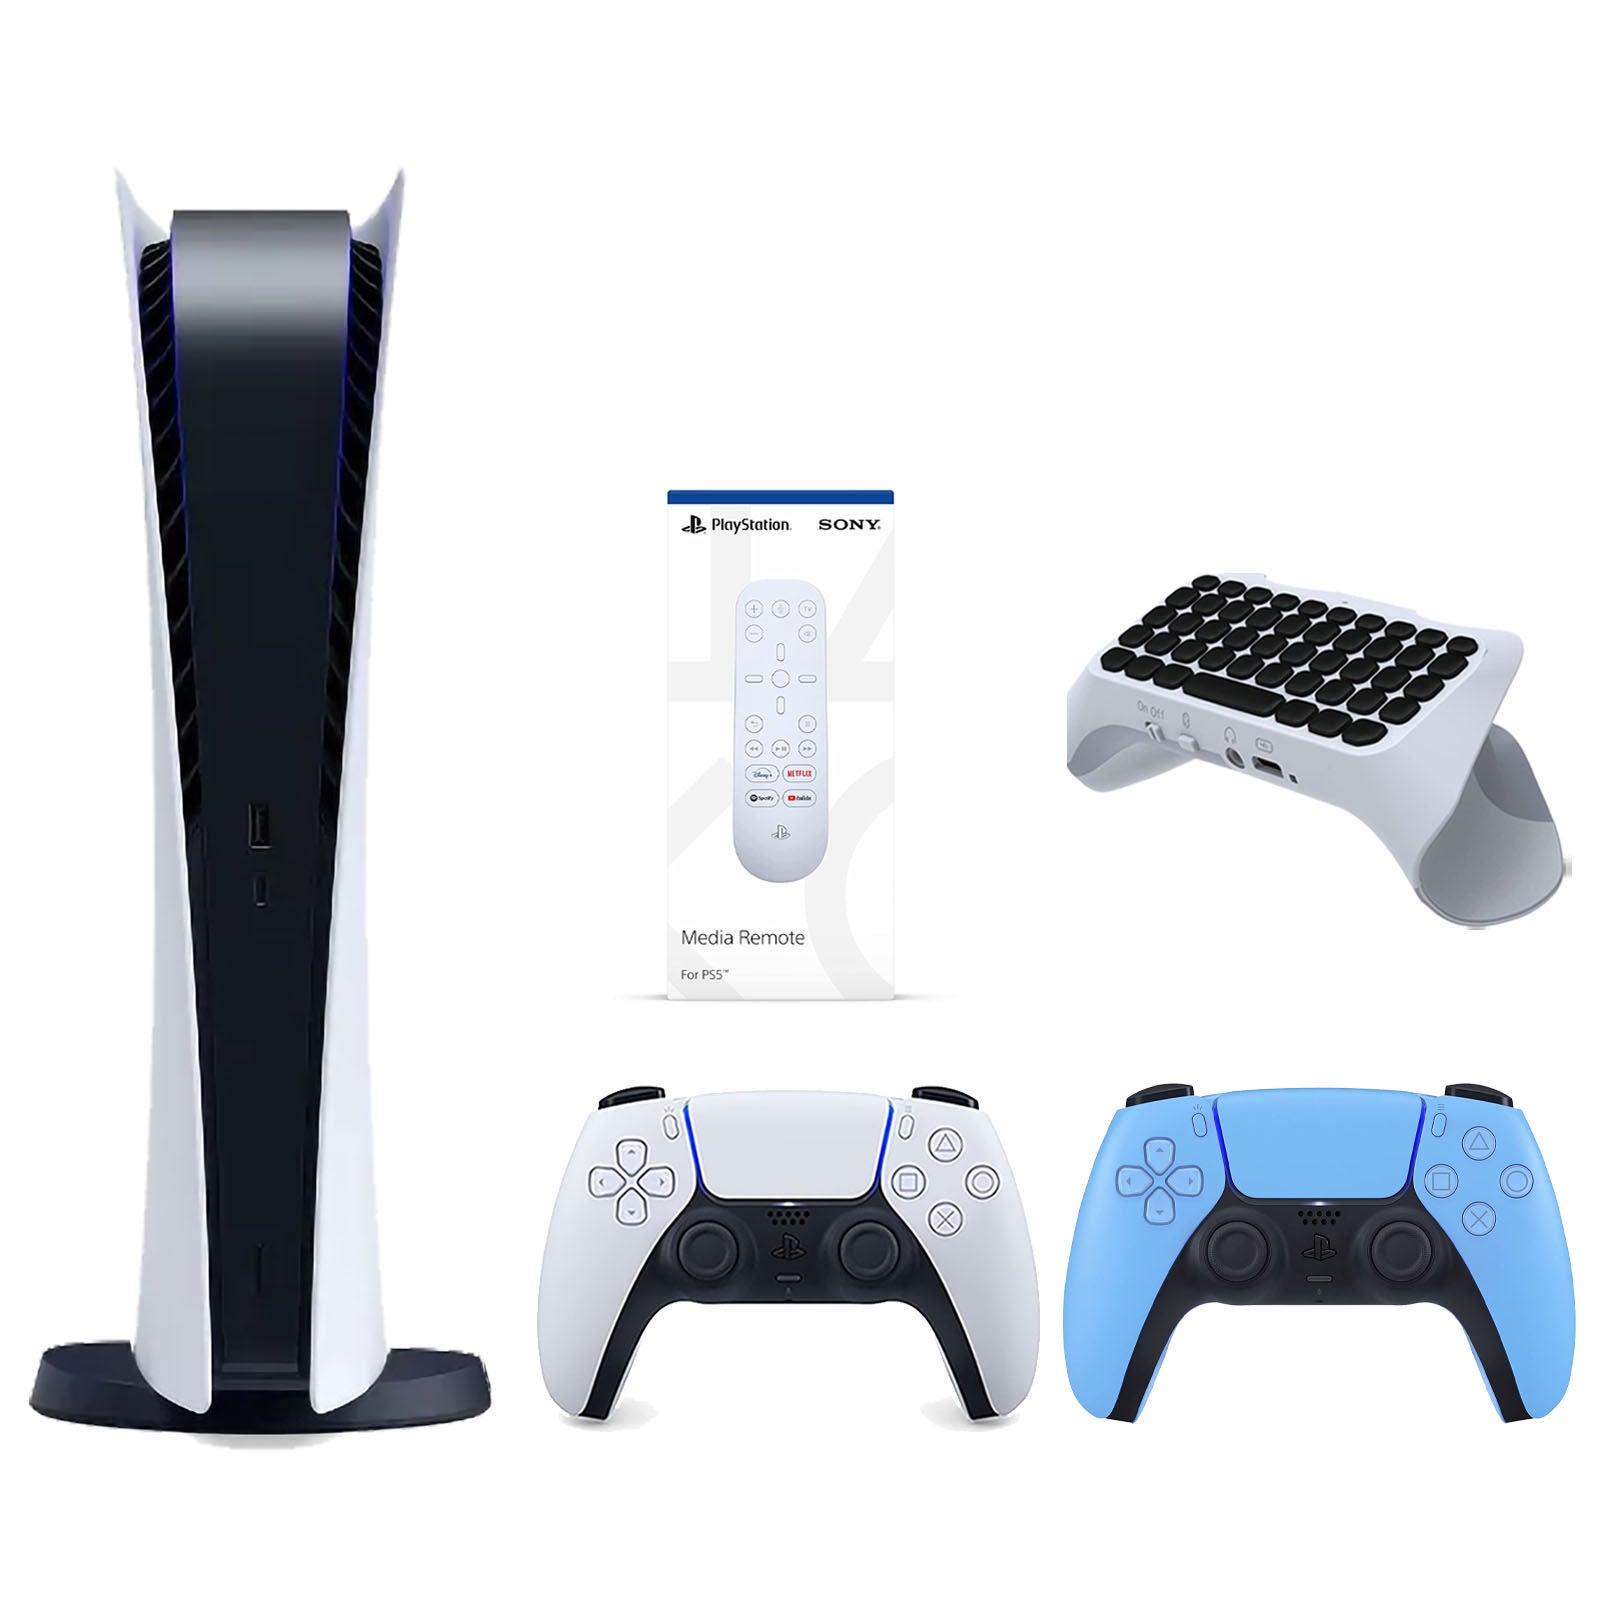 Sony Playstation 5 Digital Edition Console with Extra Blue Controller, Media Remote and Surge QuickType 2.0 Wireless PS5 Controller Keypad Bundle - Pro-Distributing